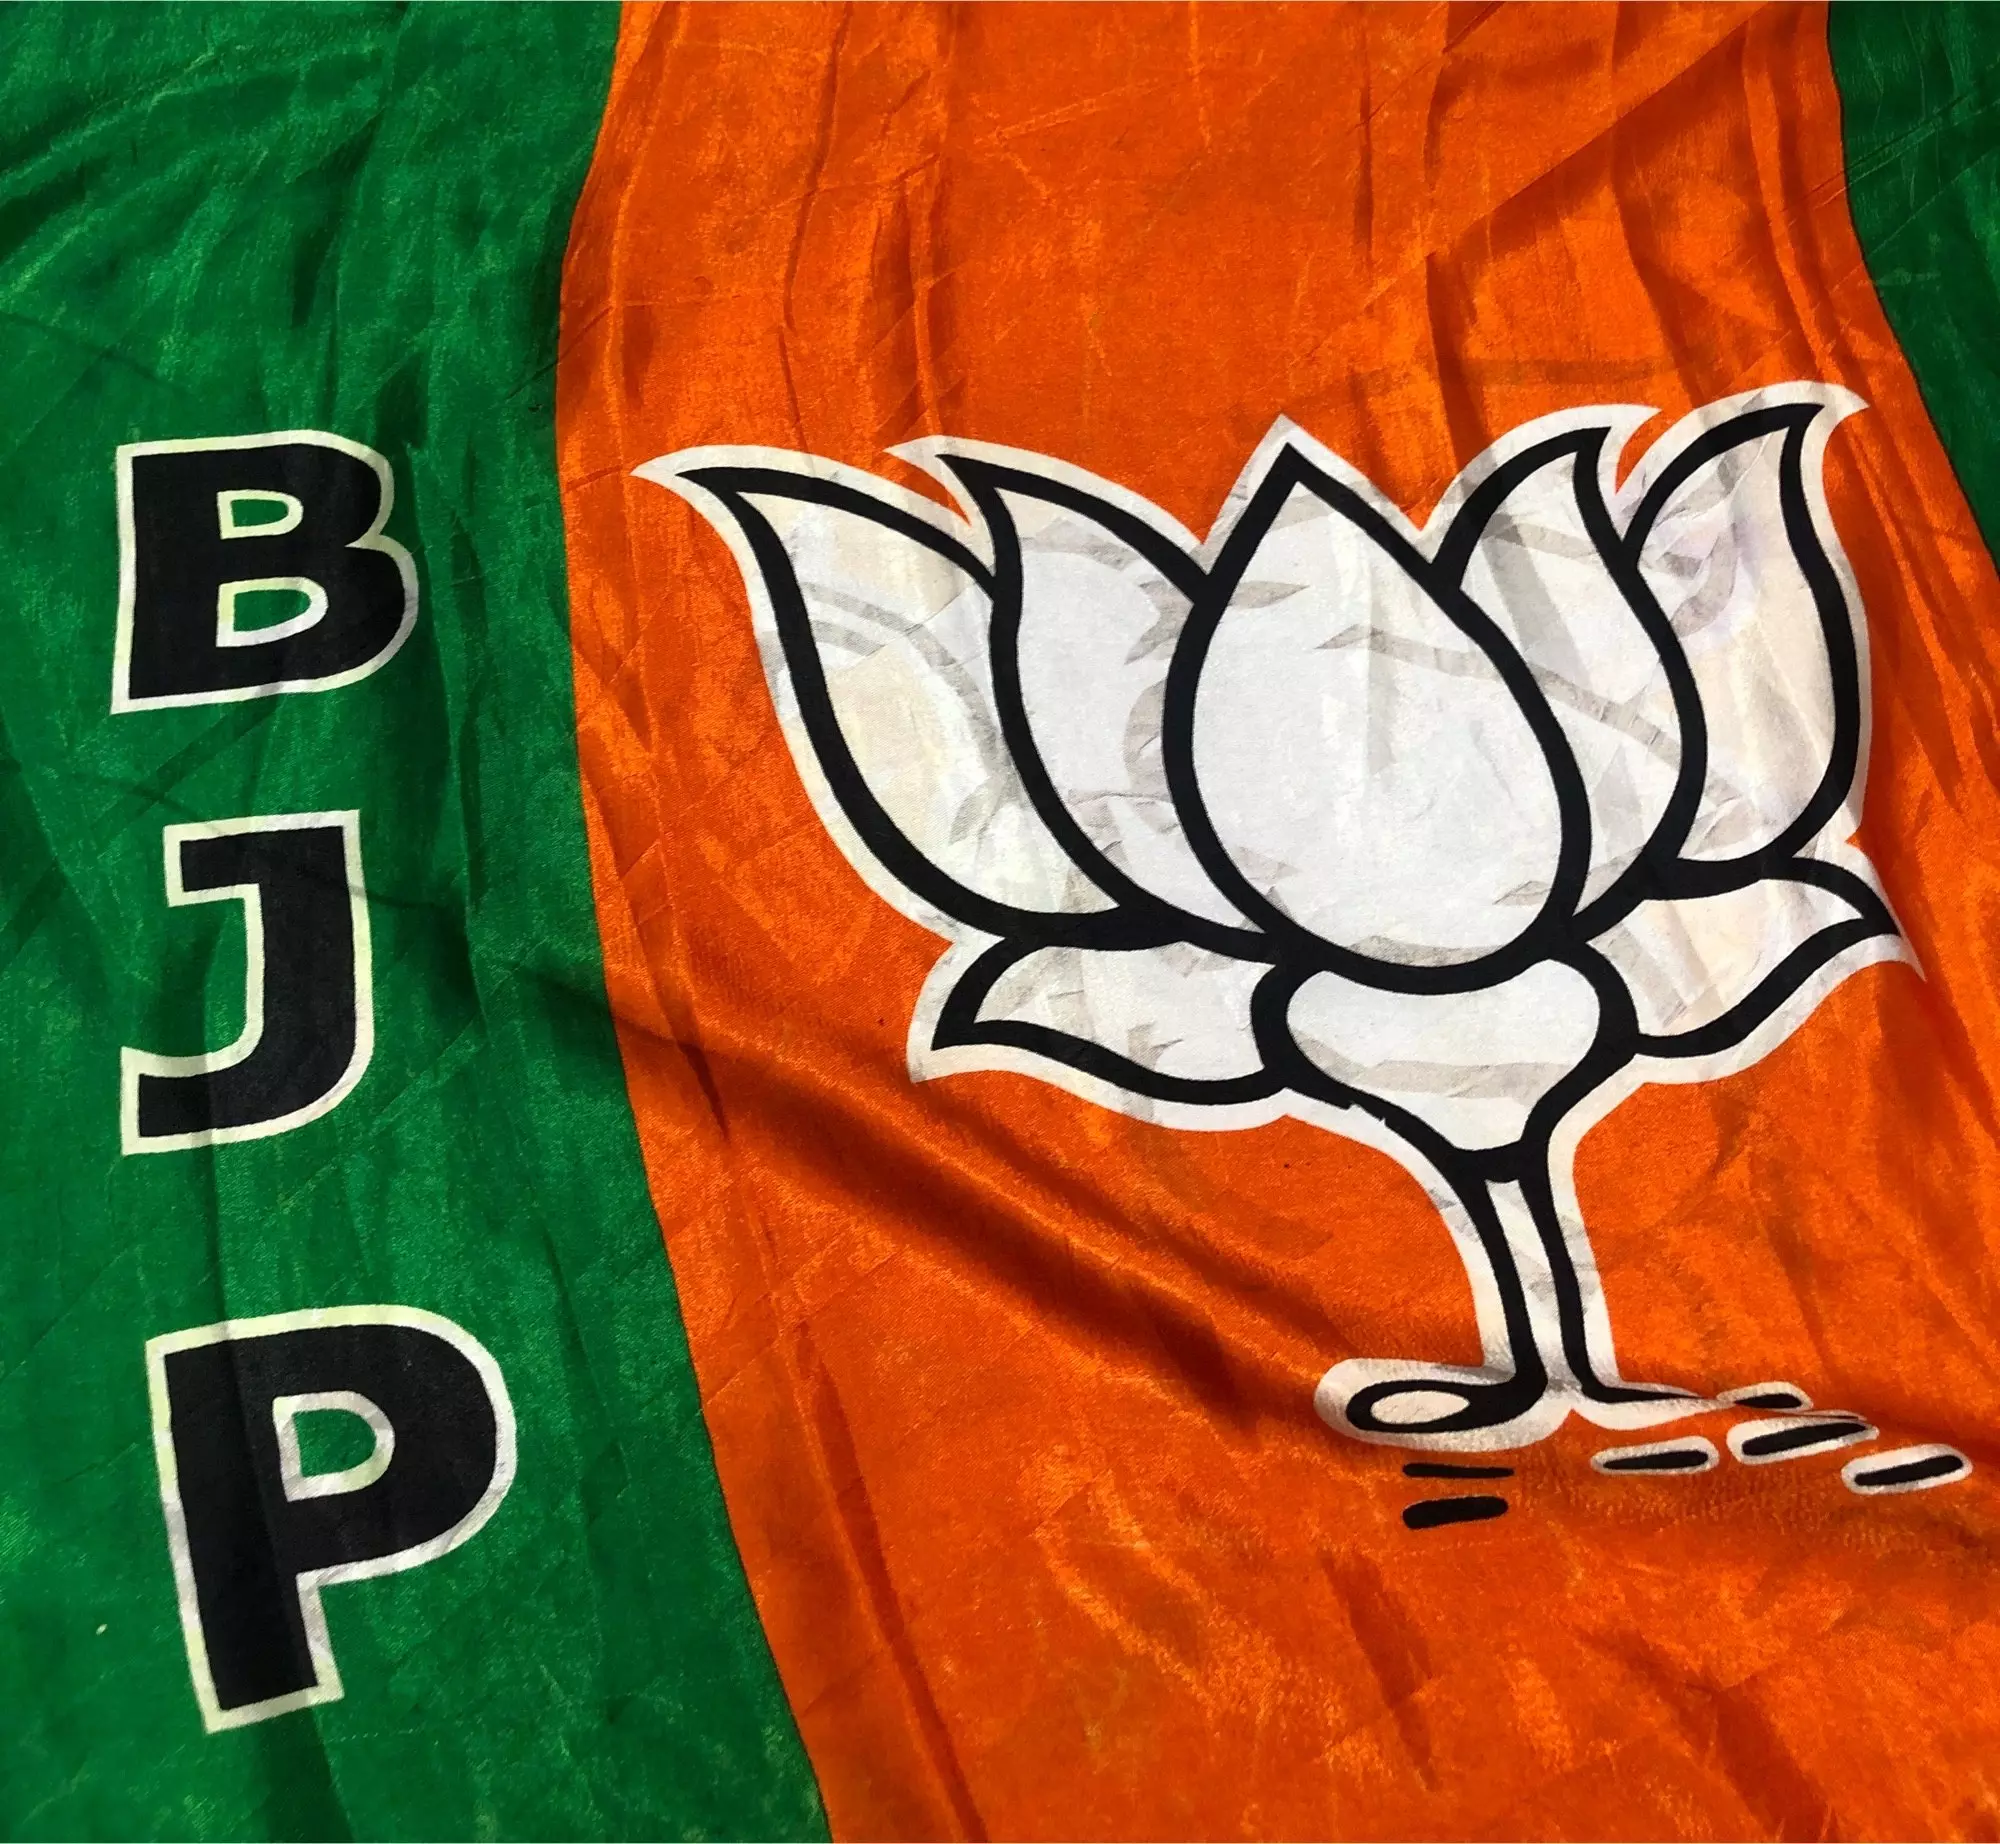 BJP Targets Chhindwara, Aims for 29 out of 29 LS Seats in MP